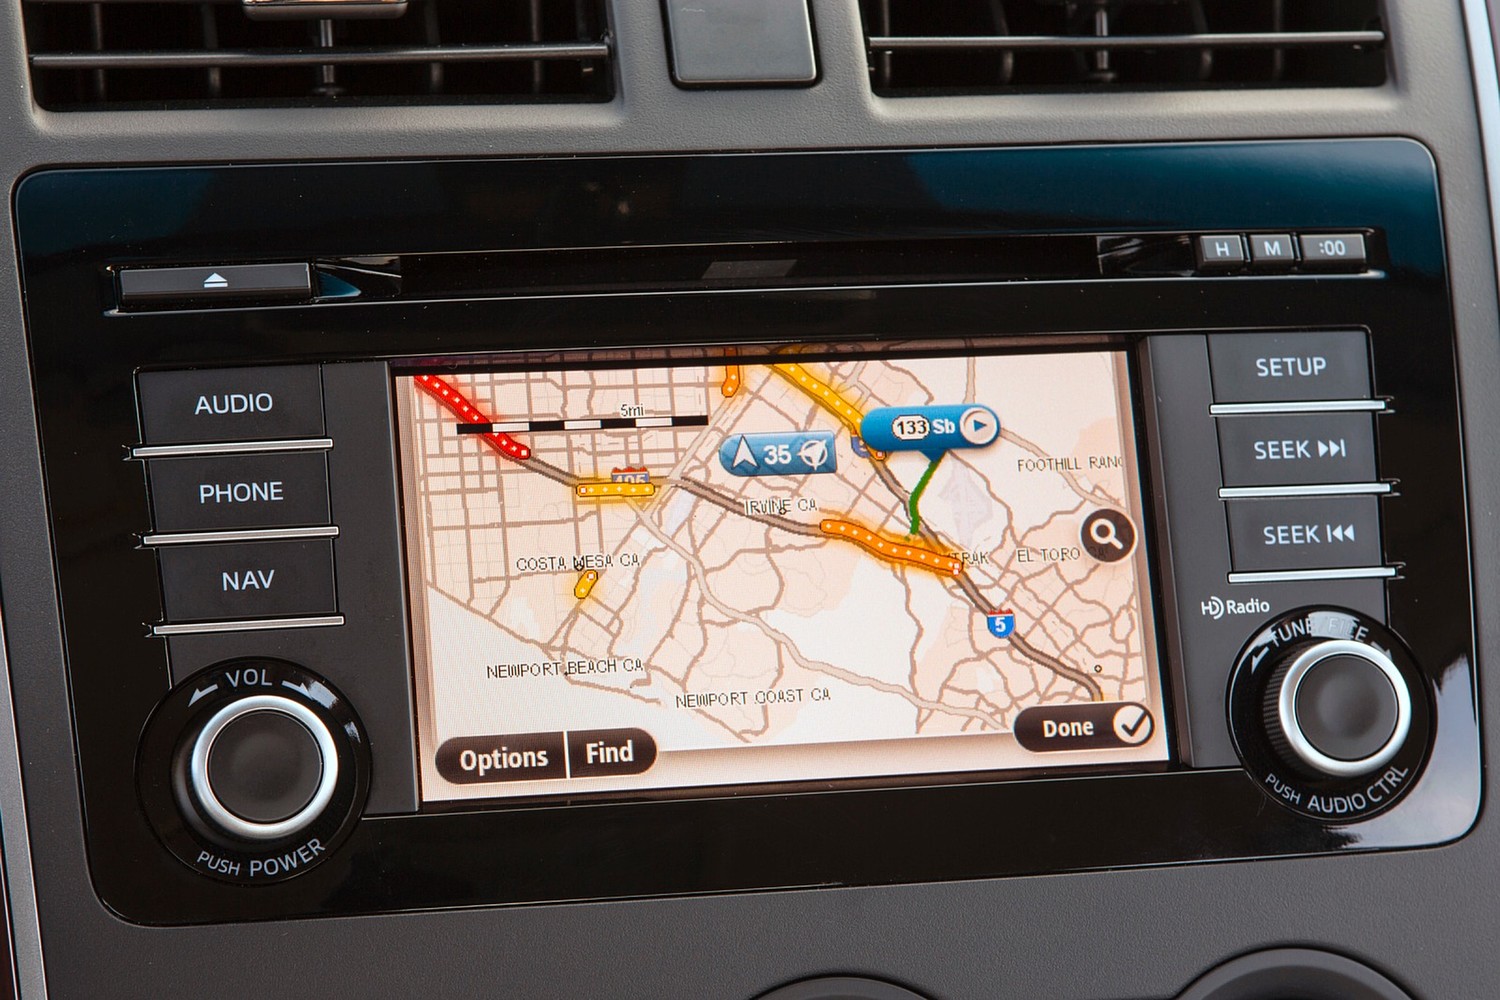 Mazda CX-9 Grand Touring 4dr SUV Navigation System (2013 model year shown)